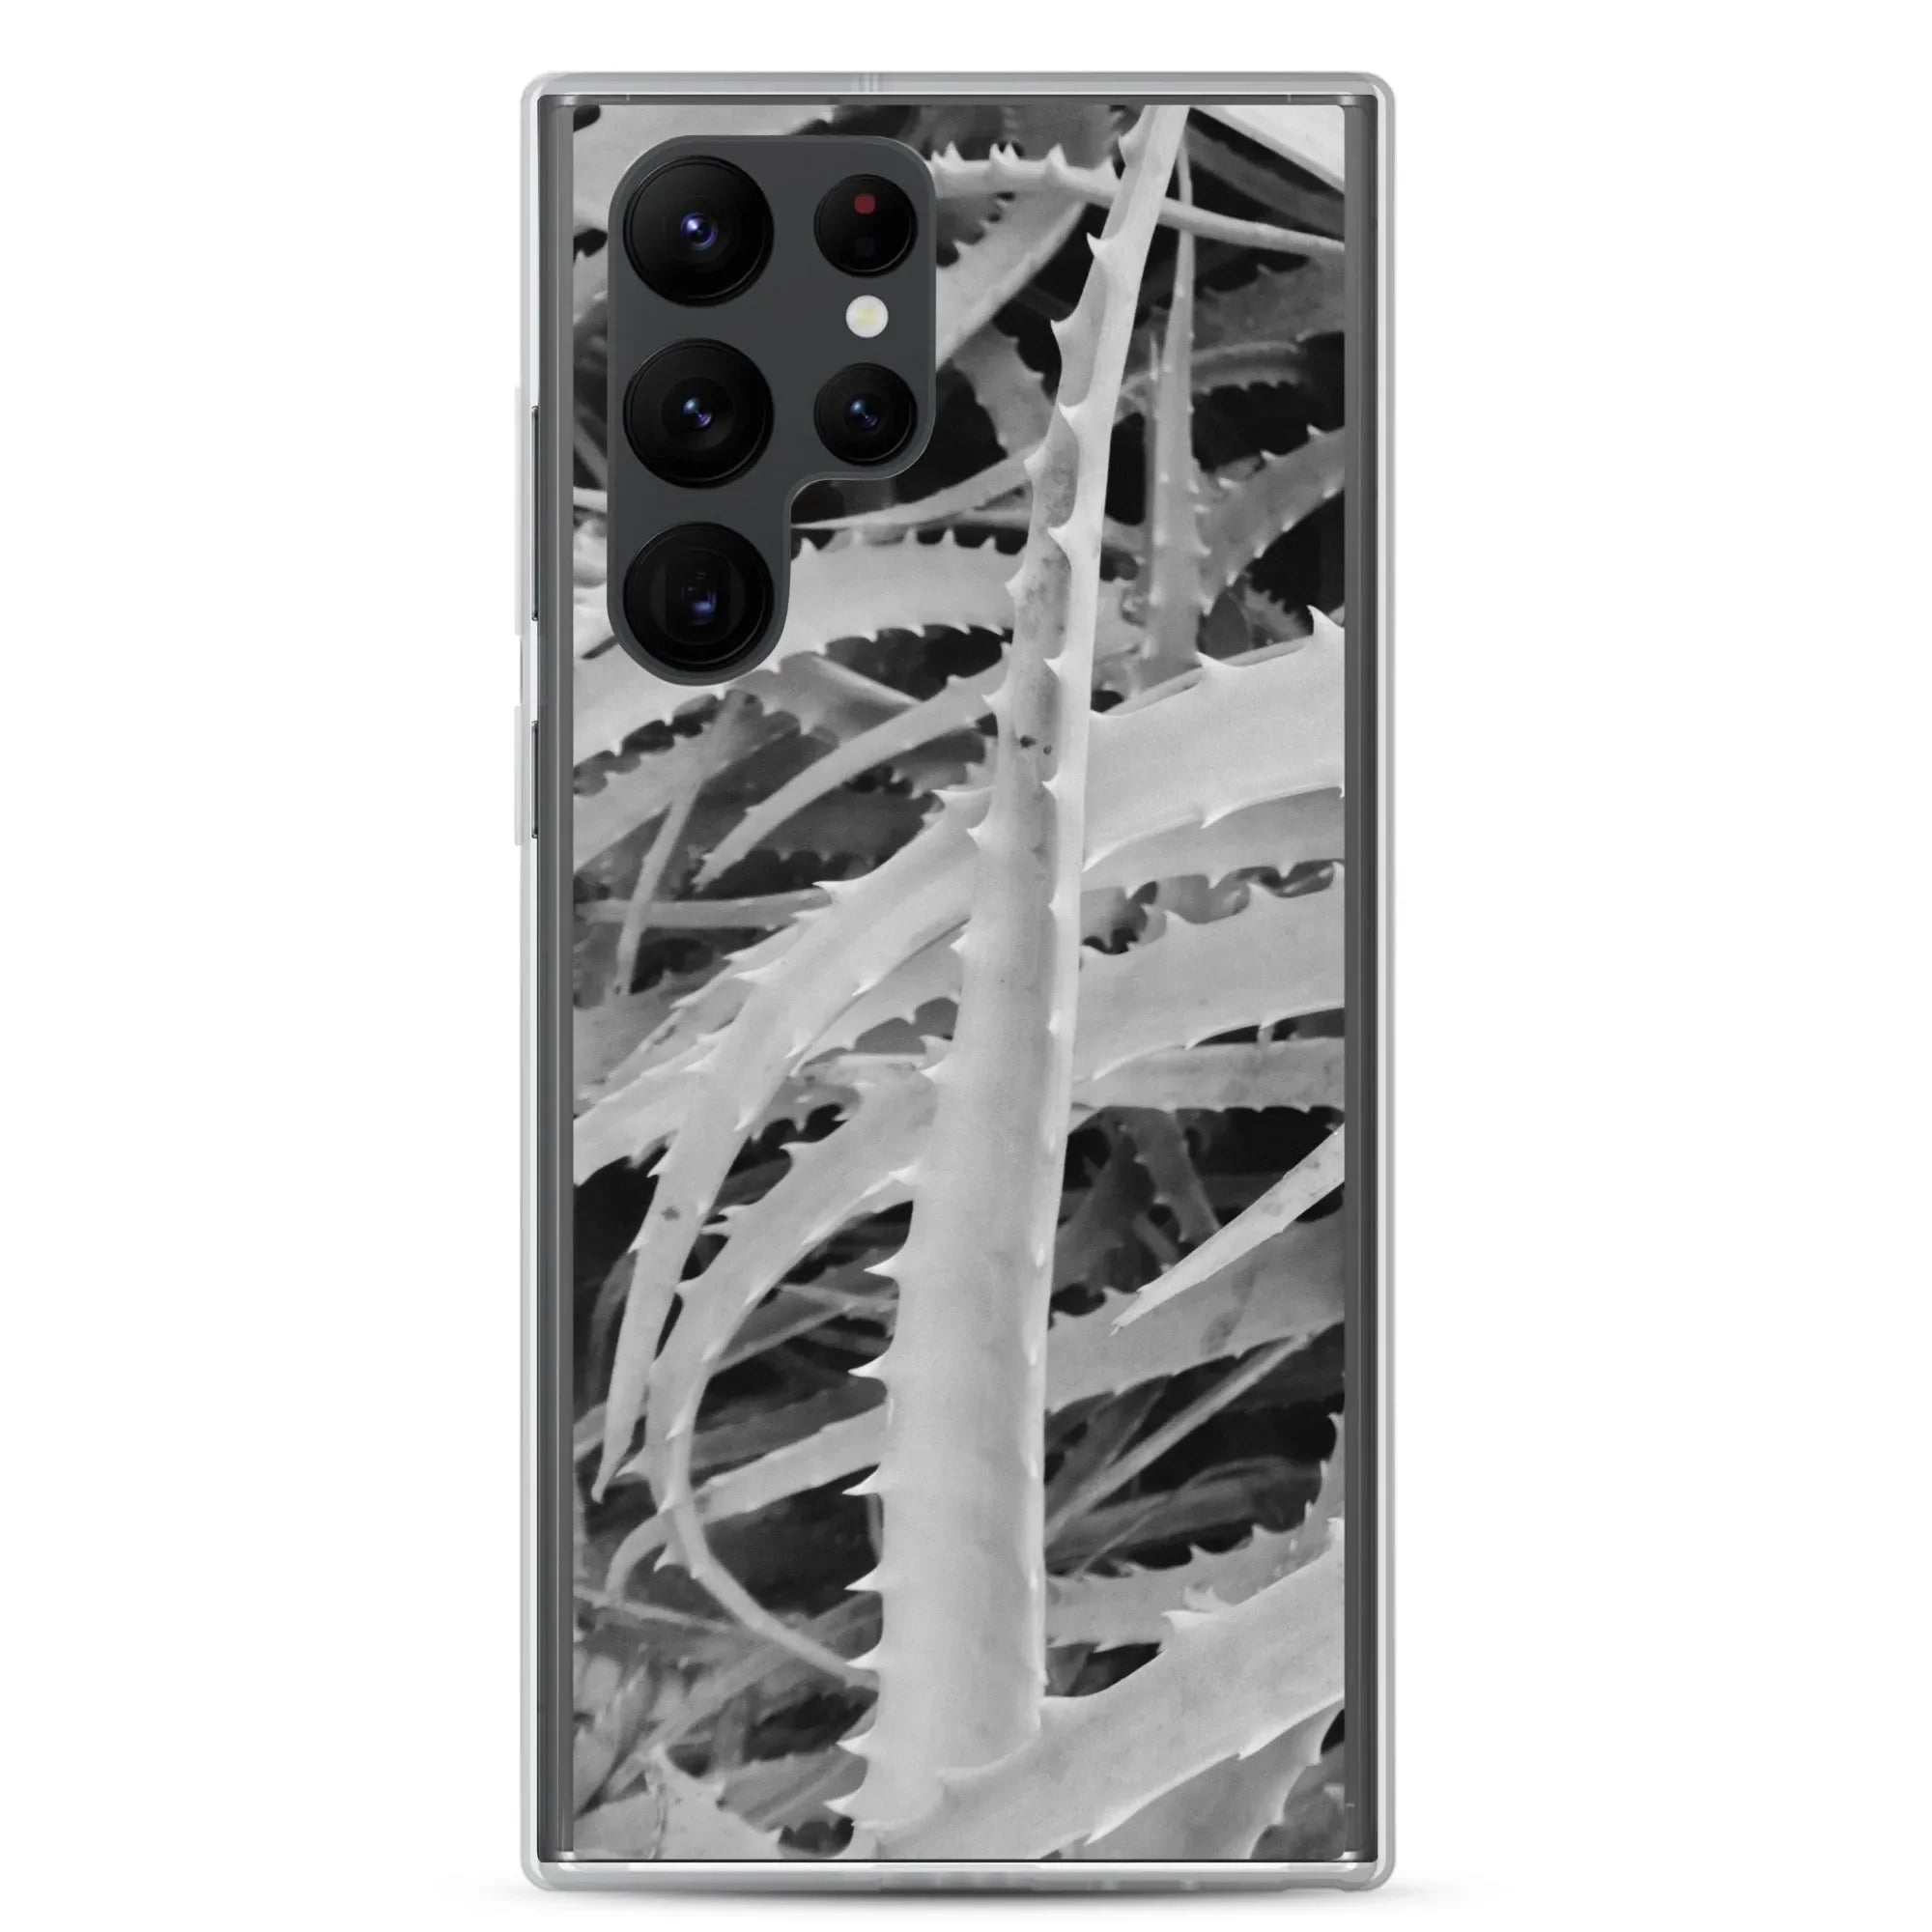 Spiked Samsung Galaxy Case - Black And White - Samsung Galaxy S22 Ultra - Mobile Phone Cases - Aesthetic Art